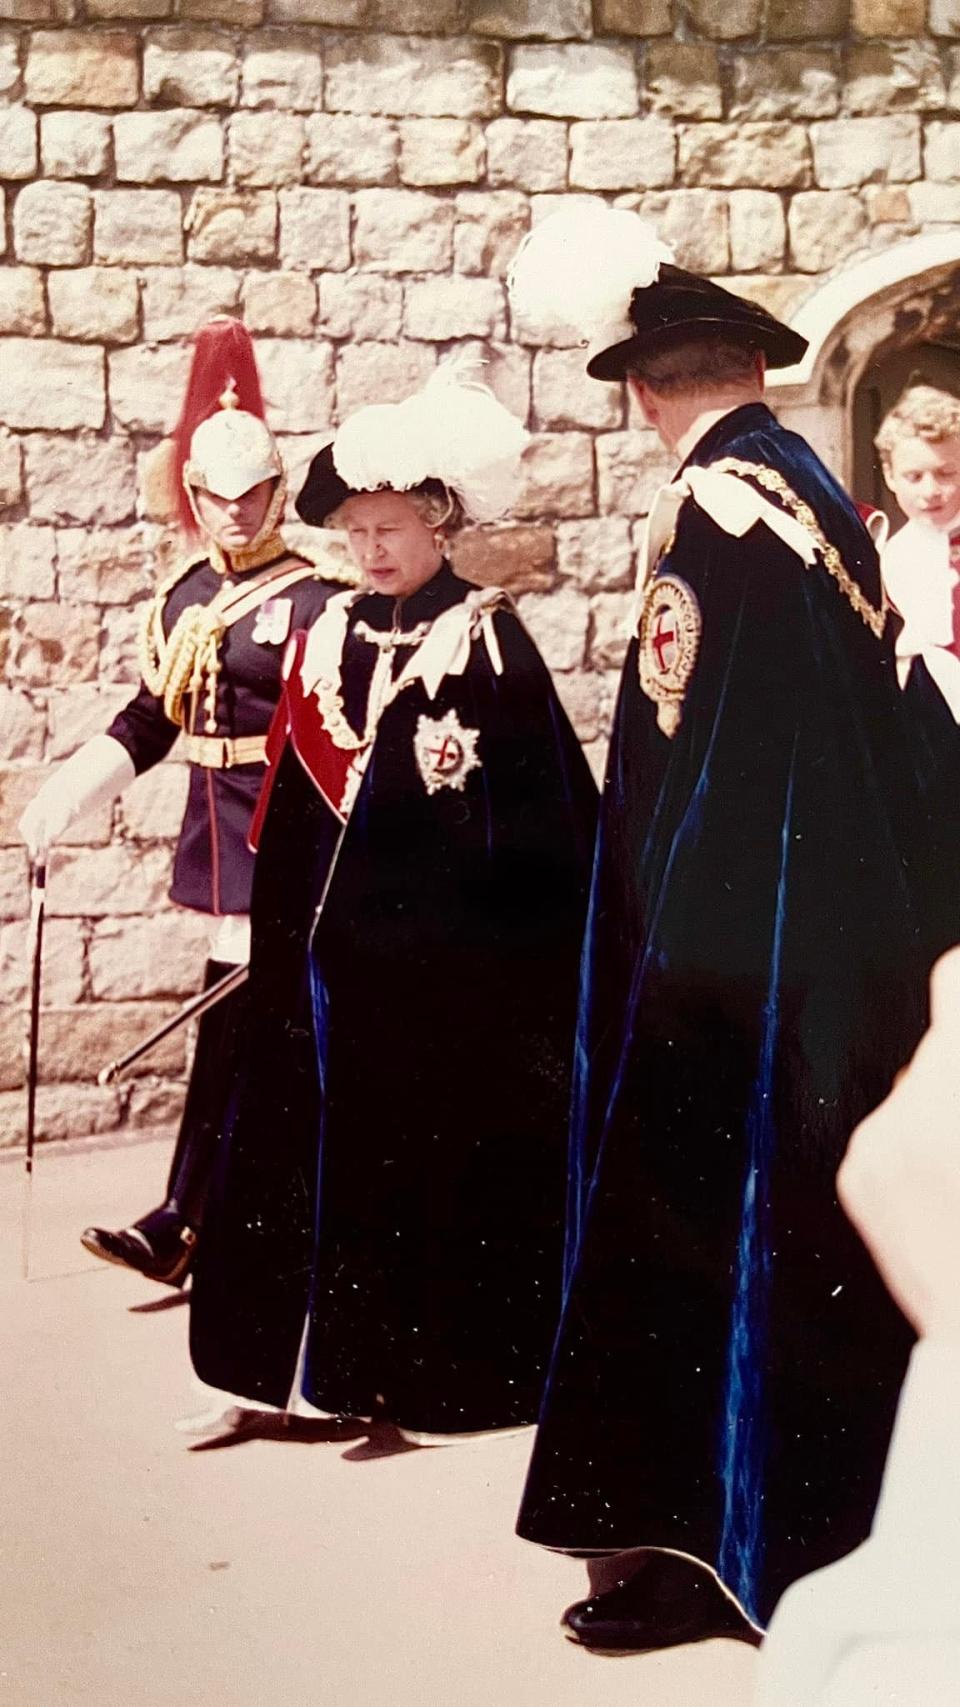 Ann Foster of Rockledge took this photo of Queen Elizabeth II several years ago at an Order of the Garter service. She posted the photo on Facebook Thursday in memory of the queen.